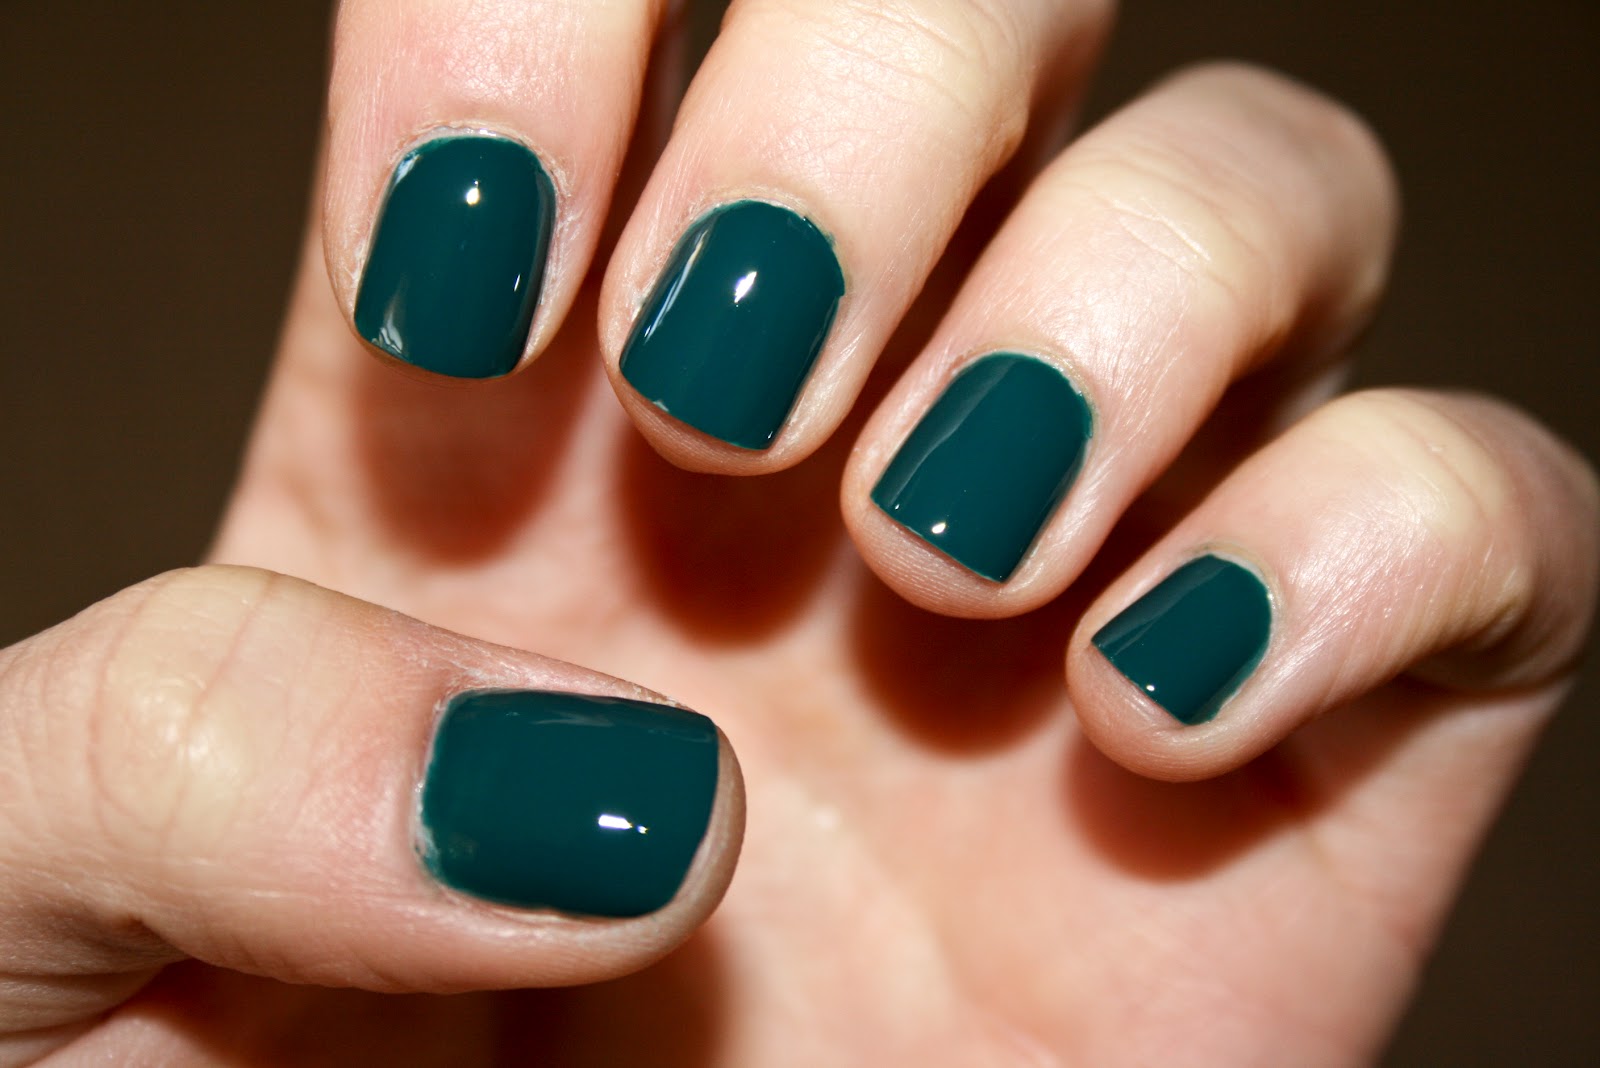 2. "Tranquil Teal" Nail Polish - wide 4